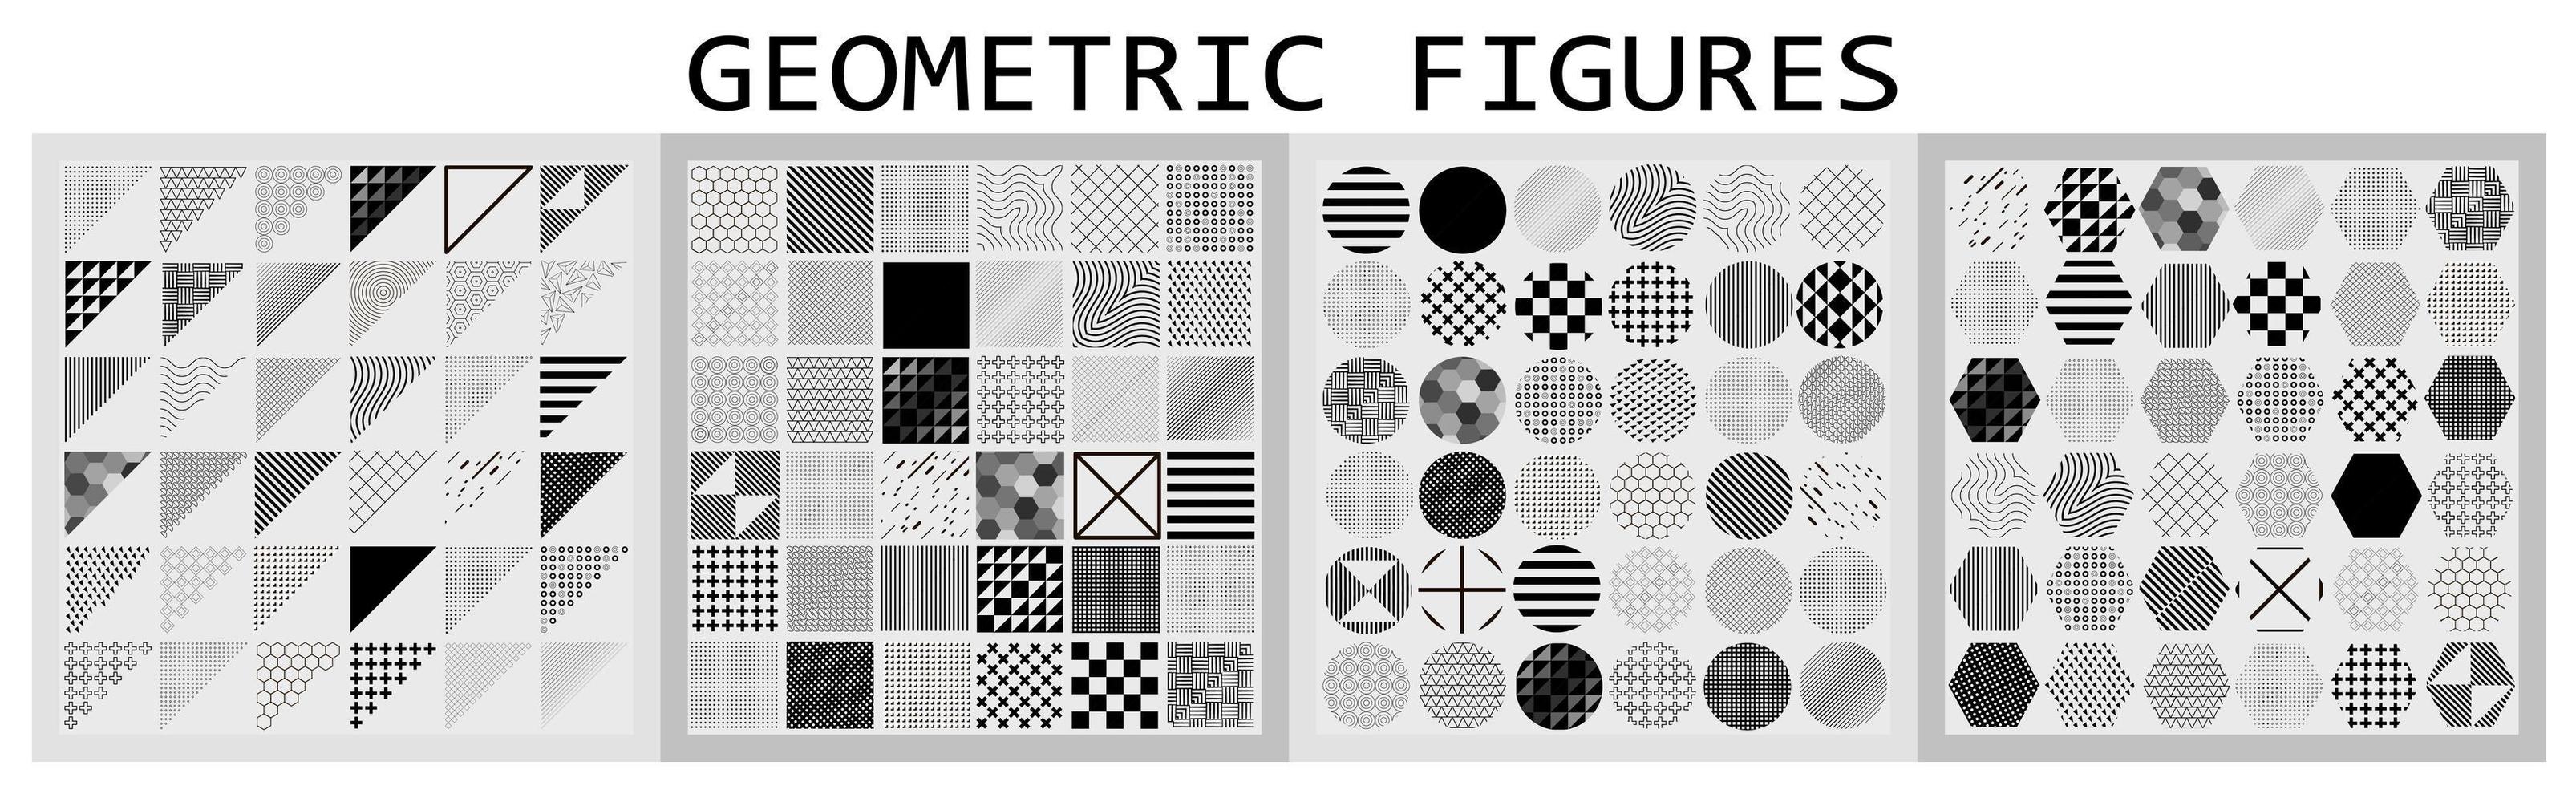 Various geometric shapes with different patterns - Vector